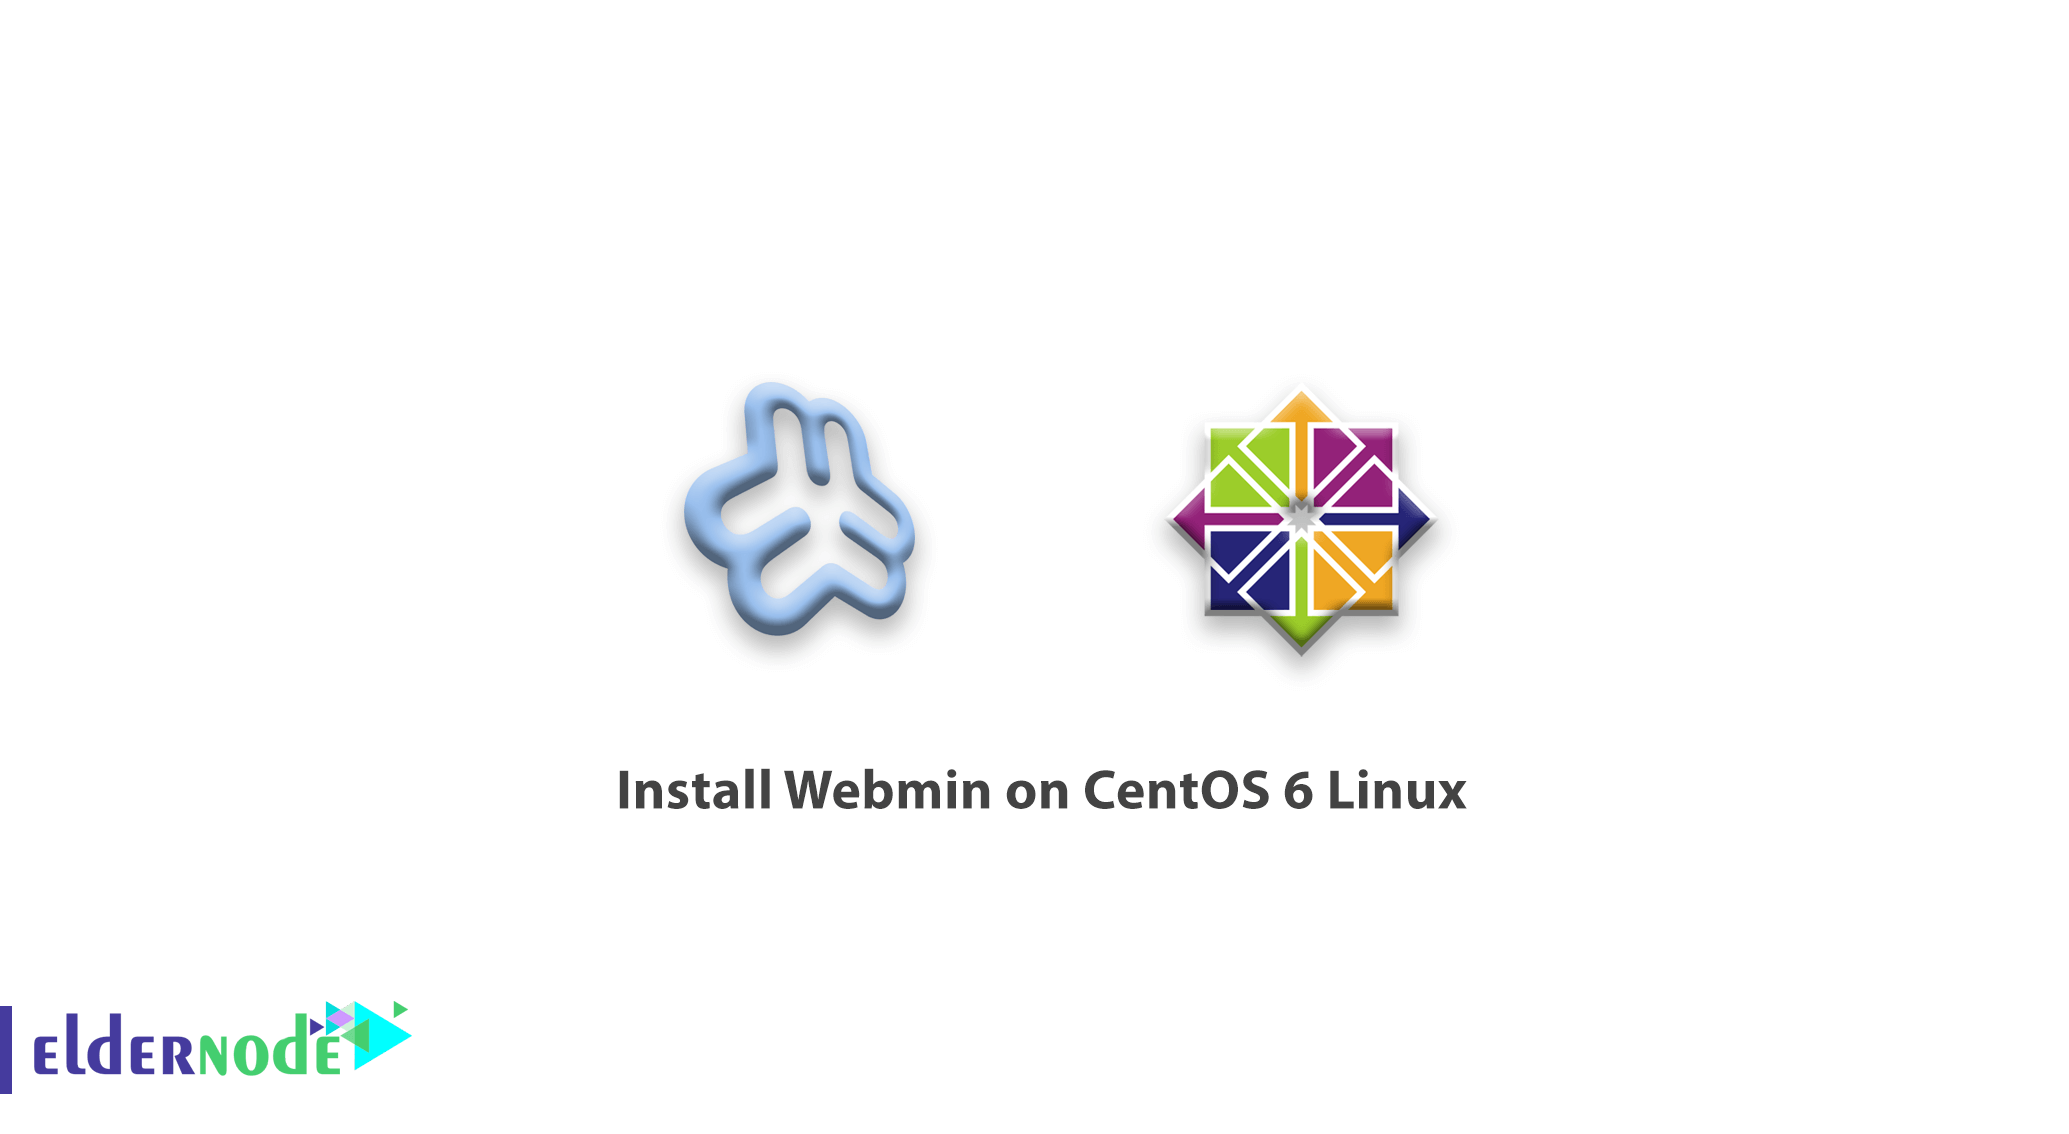 How to install Webmin on CentOS 6 Linux